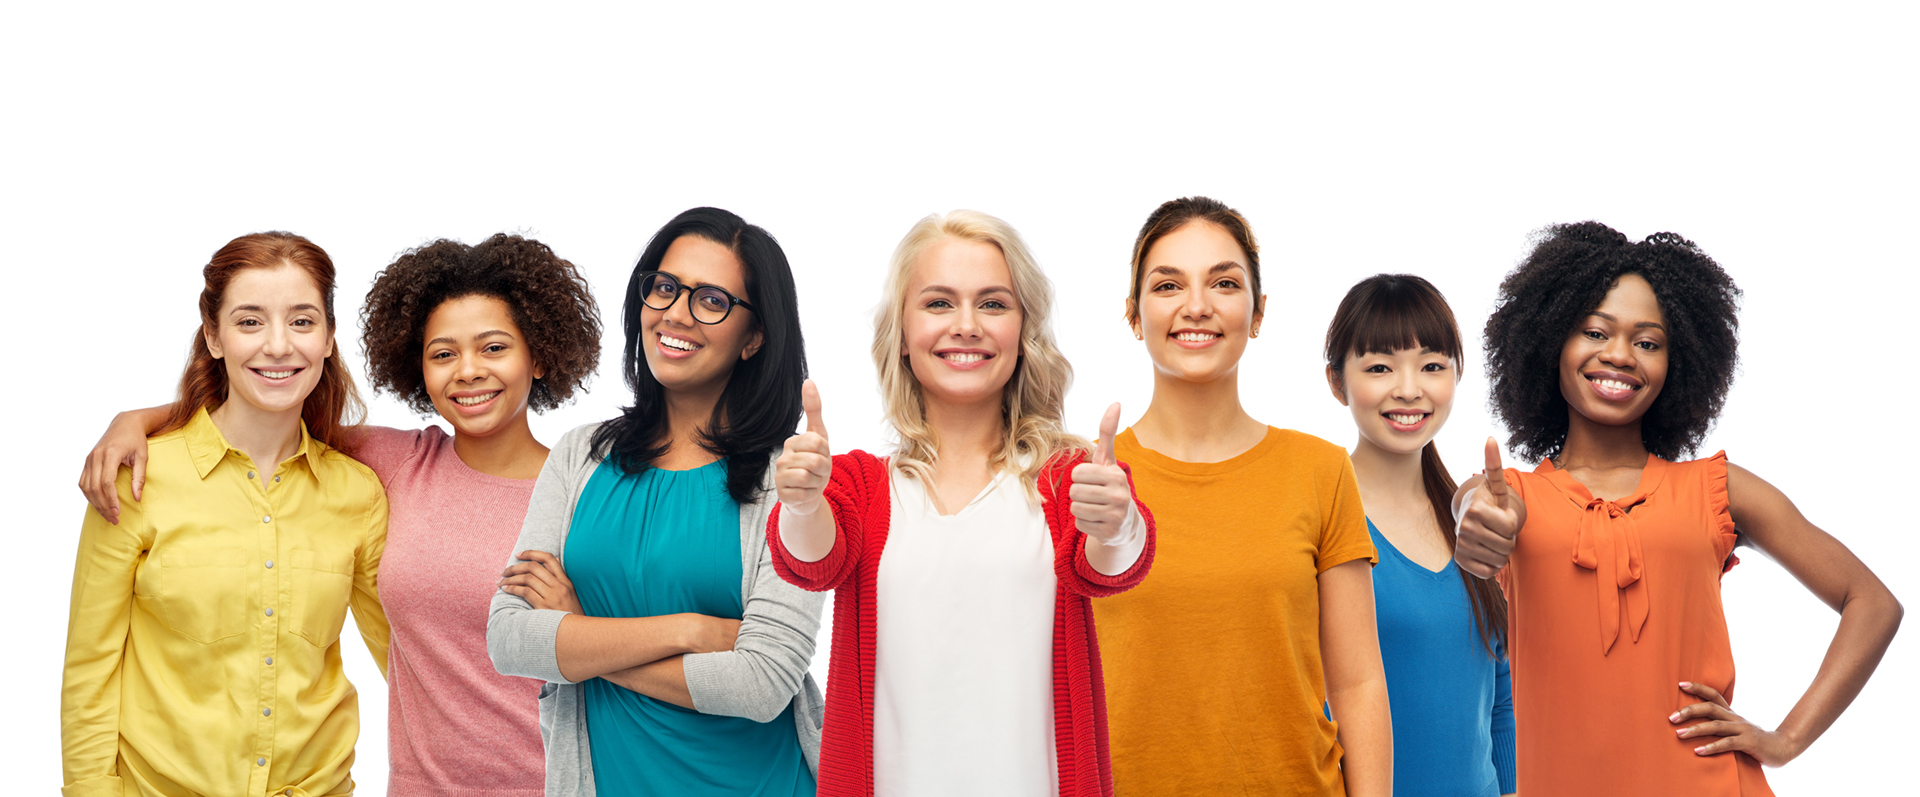 Group of women smiling and giving thumbs up